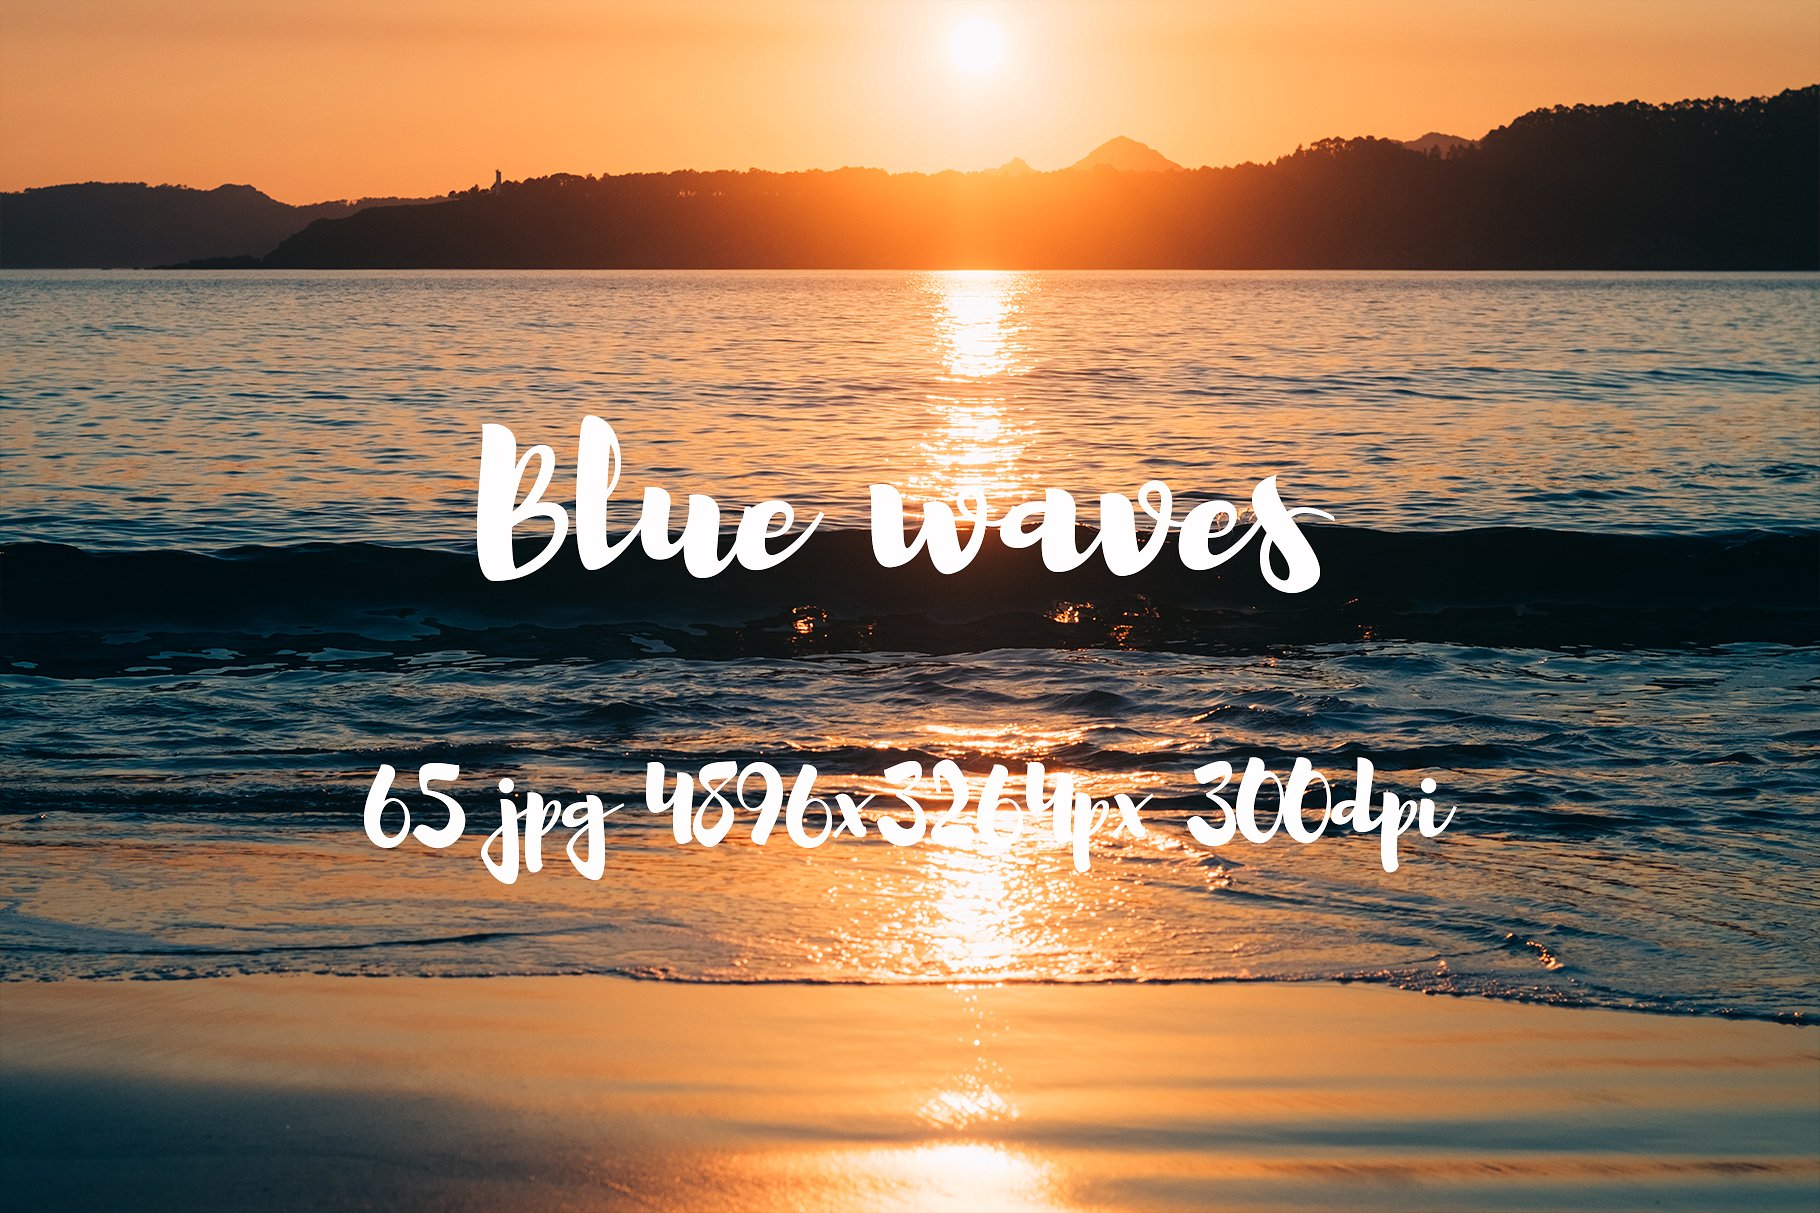 Blue waves photo pack